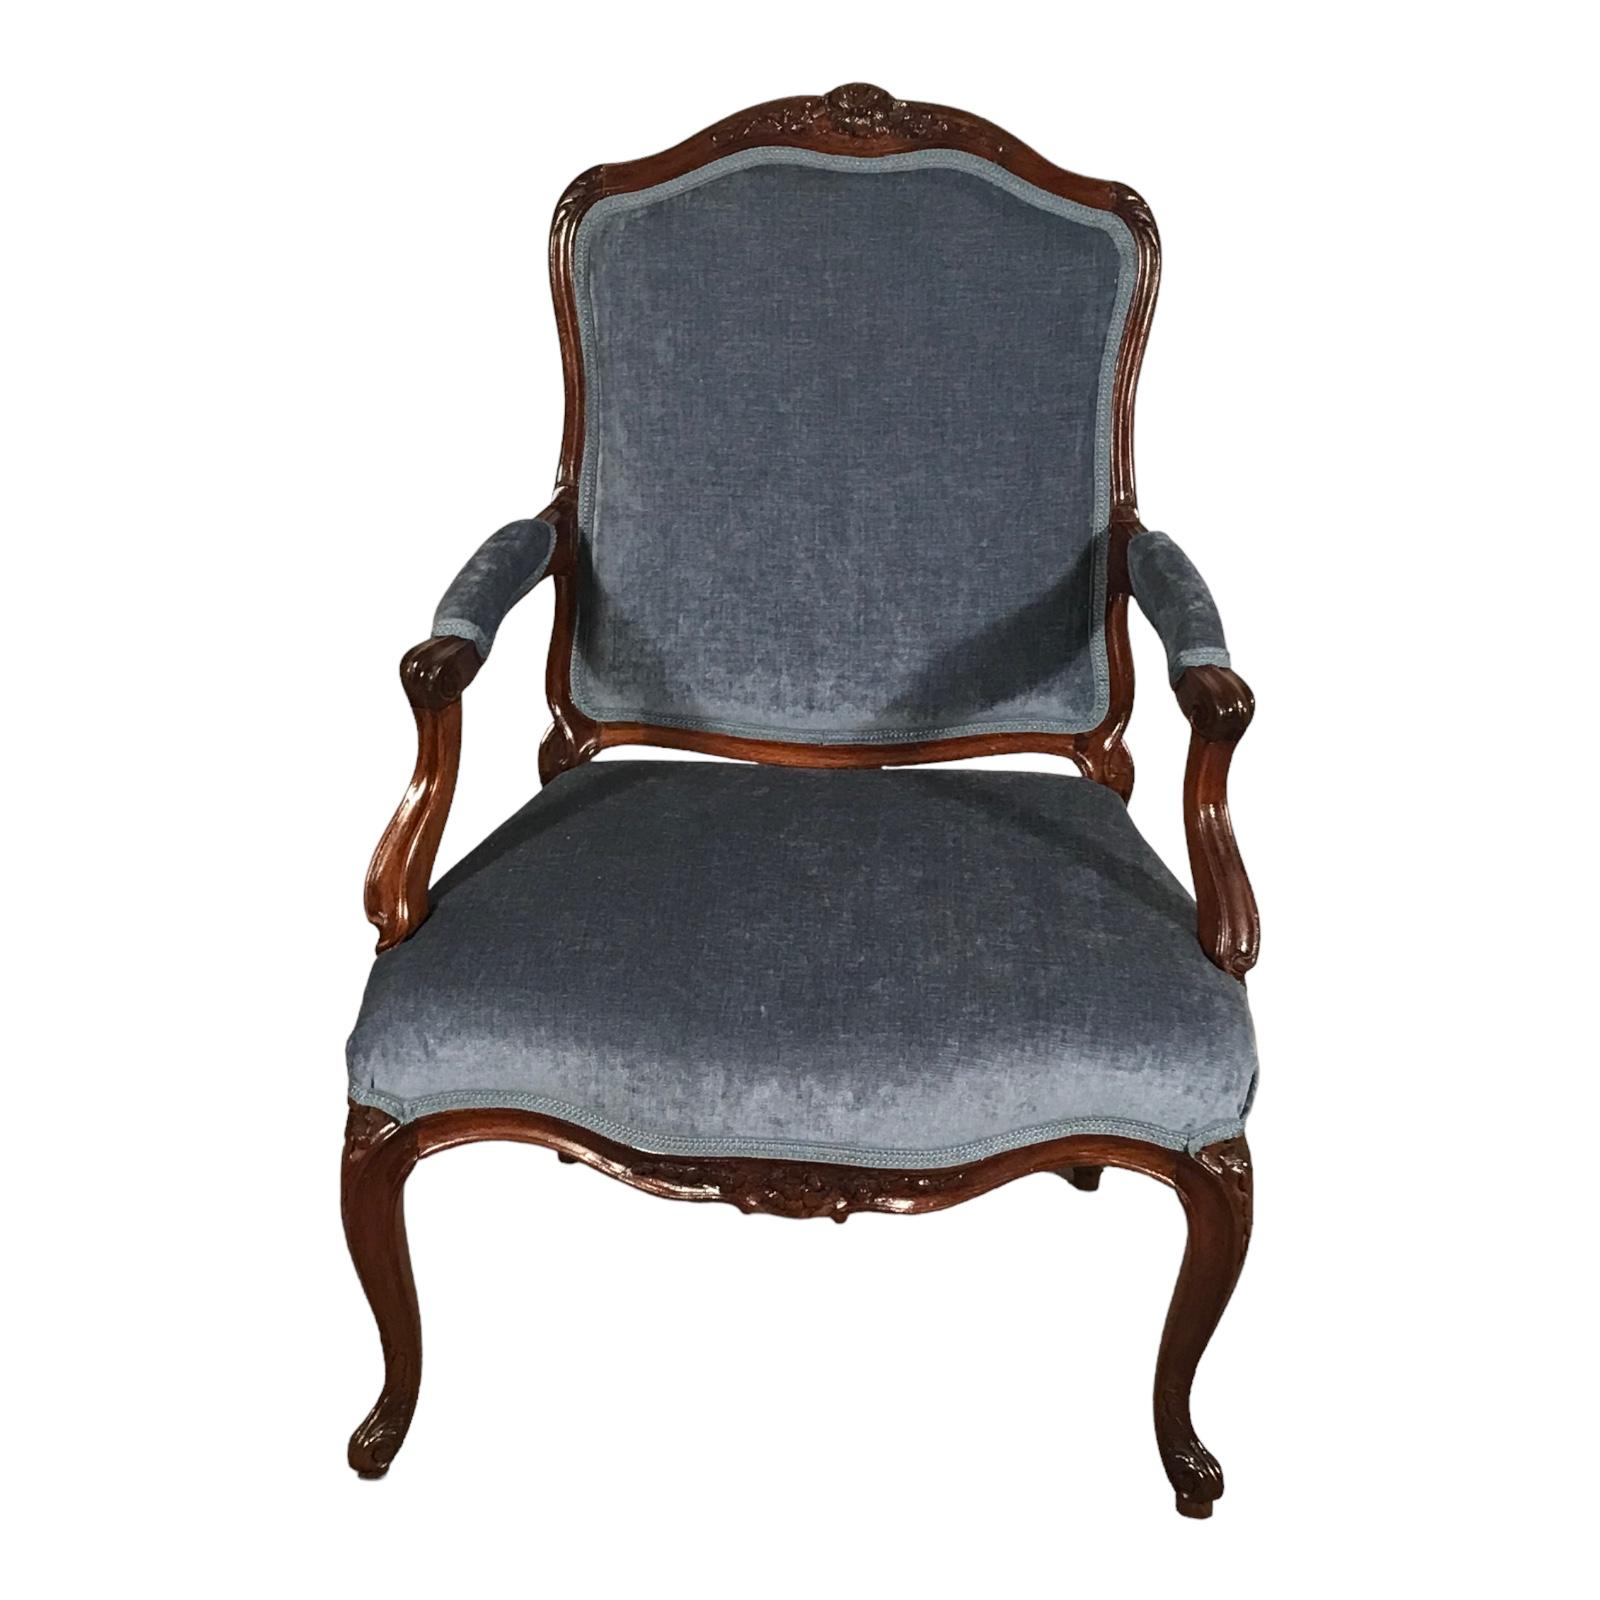 Discover a remarkable piece of history with this 18th-century Baroque armchair, meticulously preserved and dating back to 1750. 
Originating from Germany, this exquisite piece embodies the opulence and artistry of the Baroque era.  
Handcrafted from